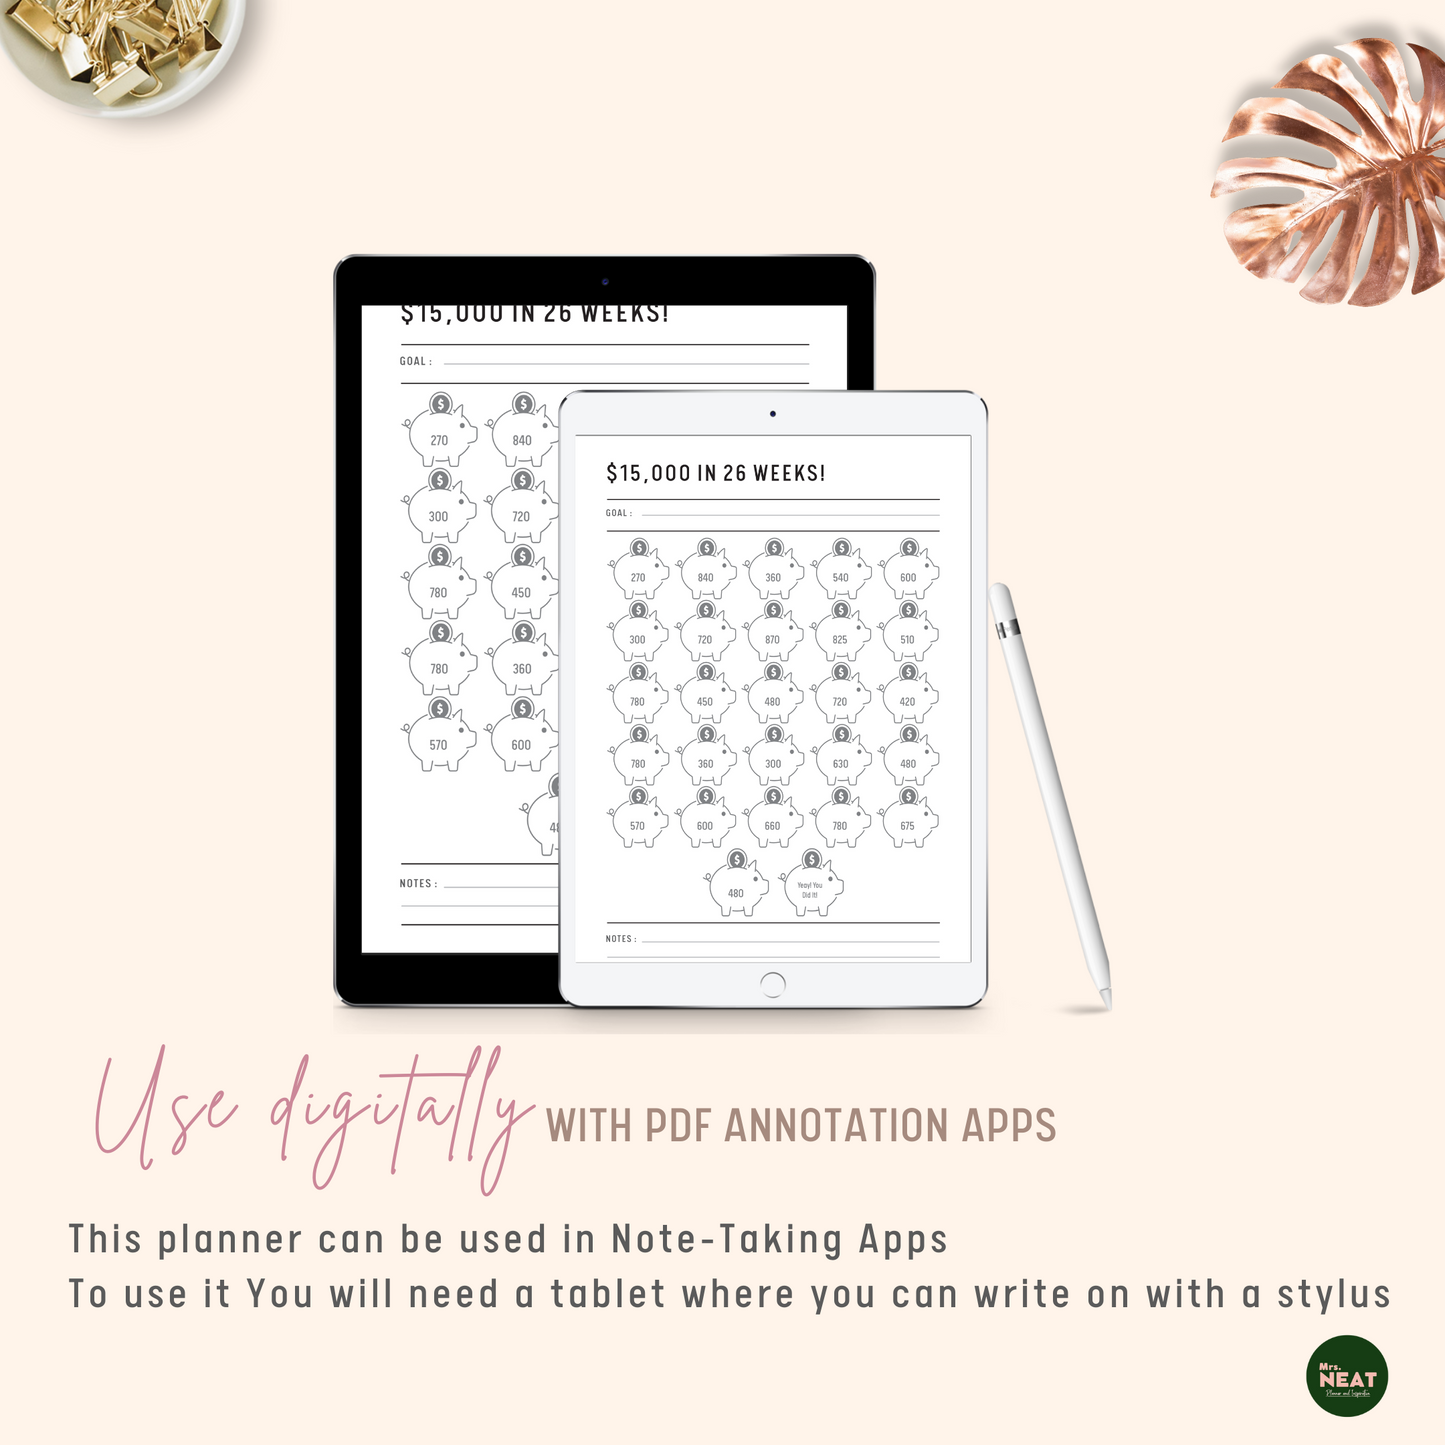 $15,000 Savings Challenge in 26 Weeks Planner can be use digitally with PDF Annotation Apps